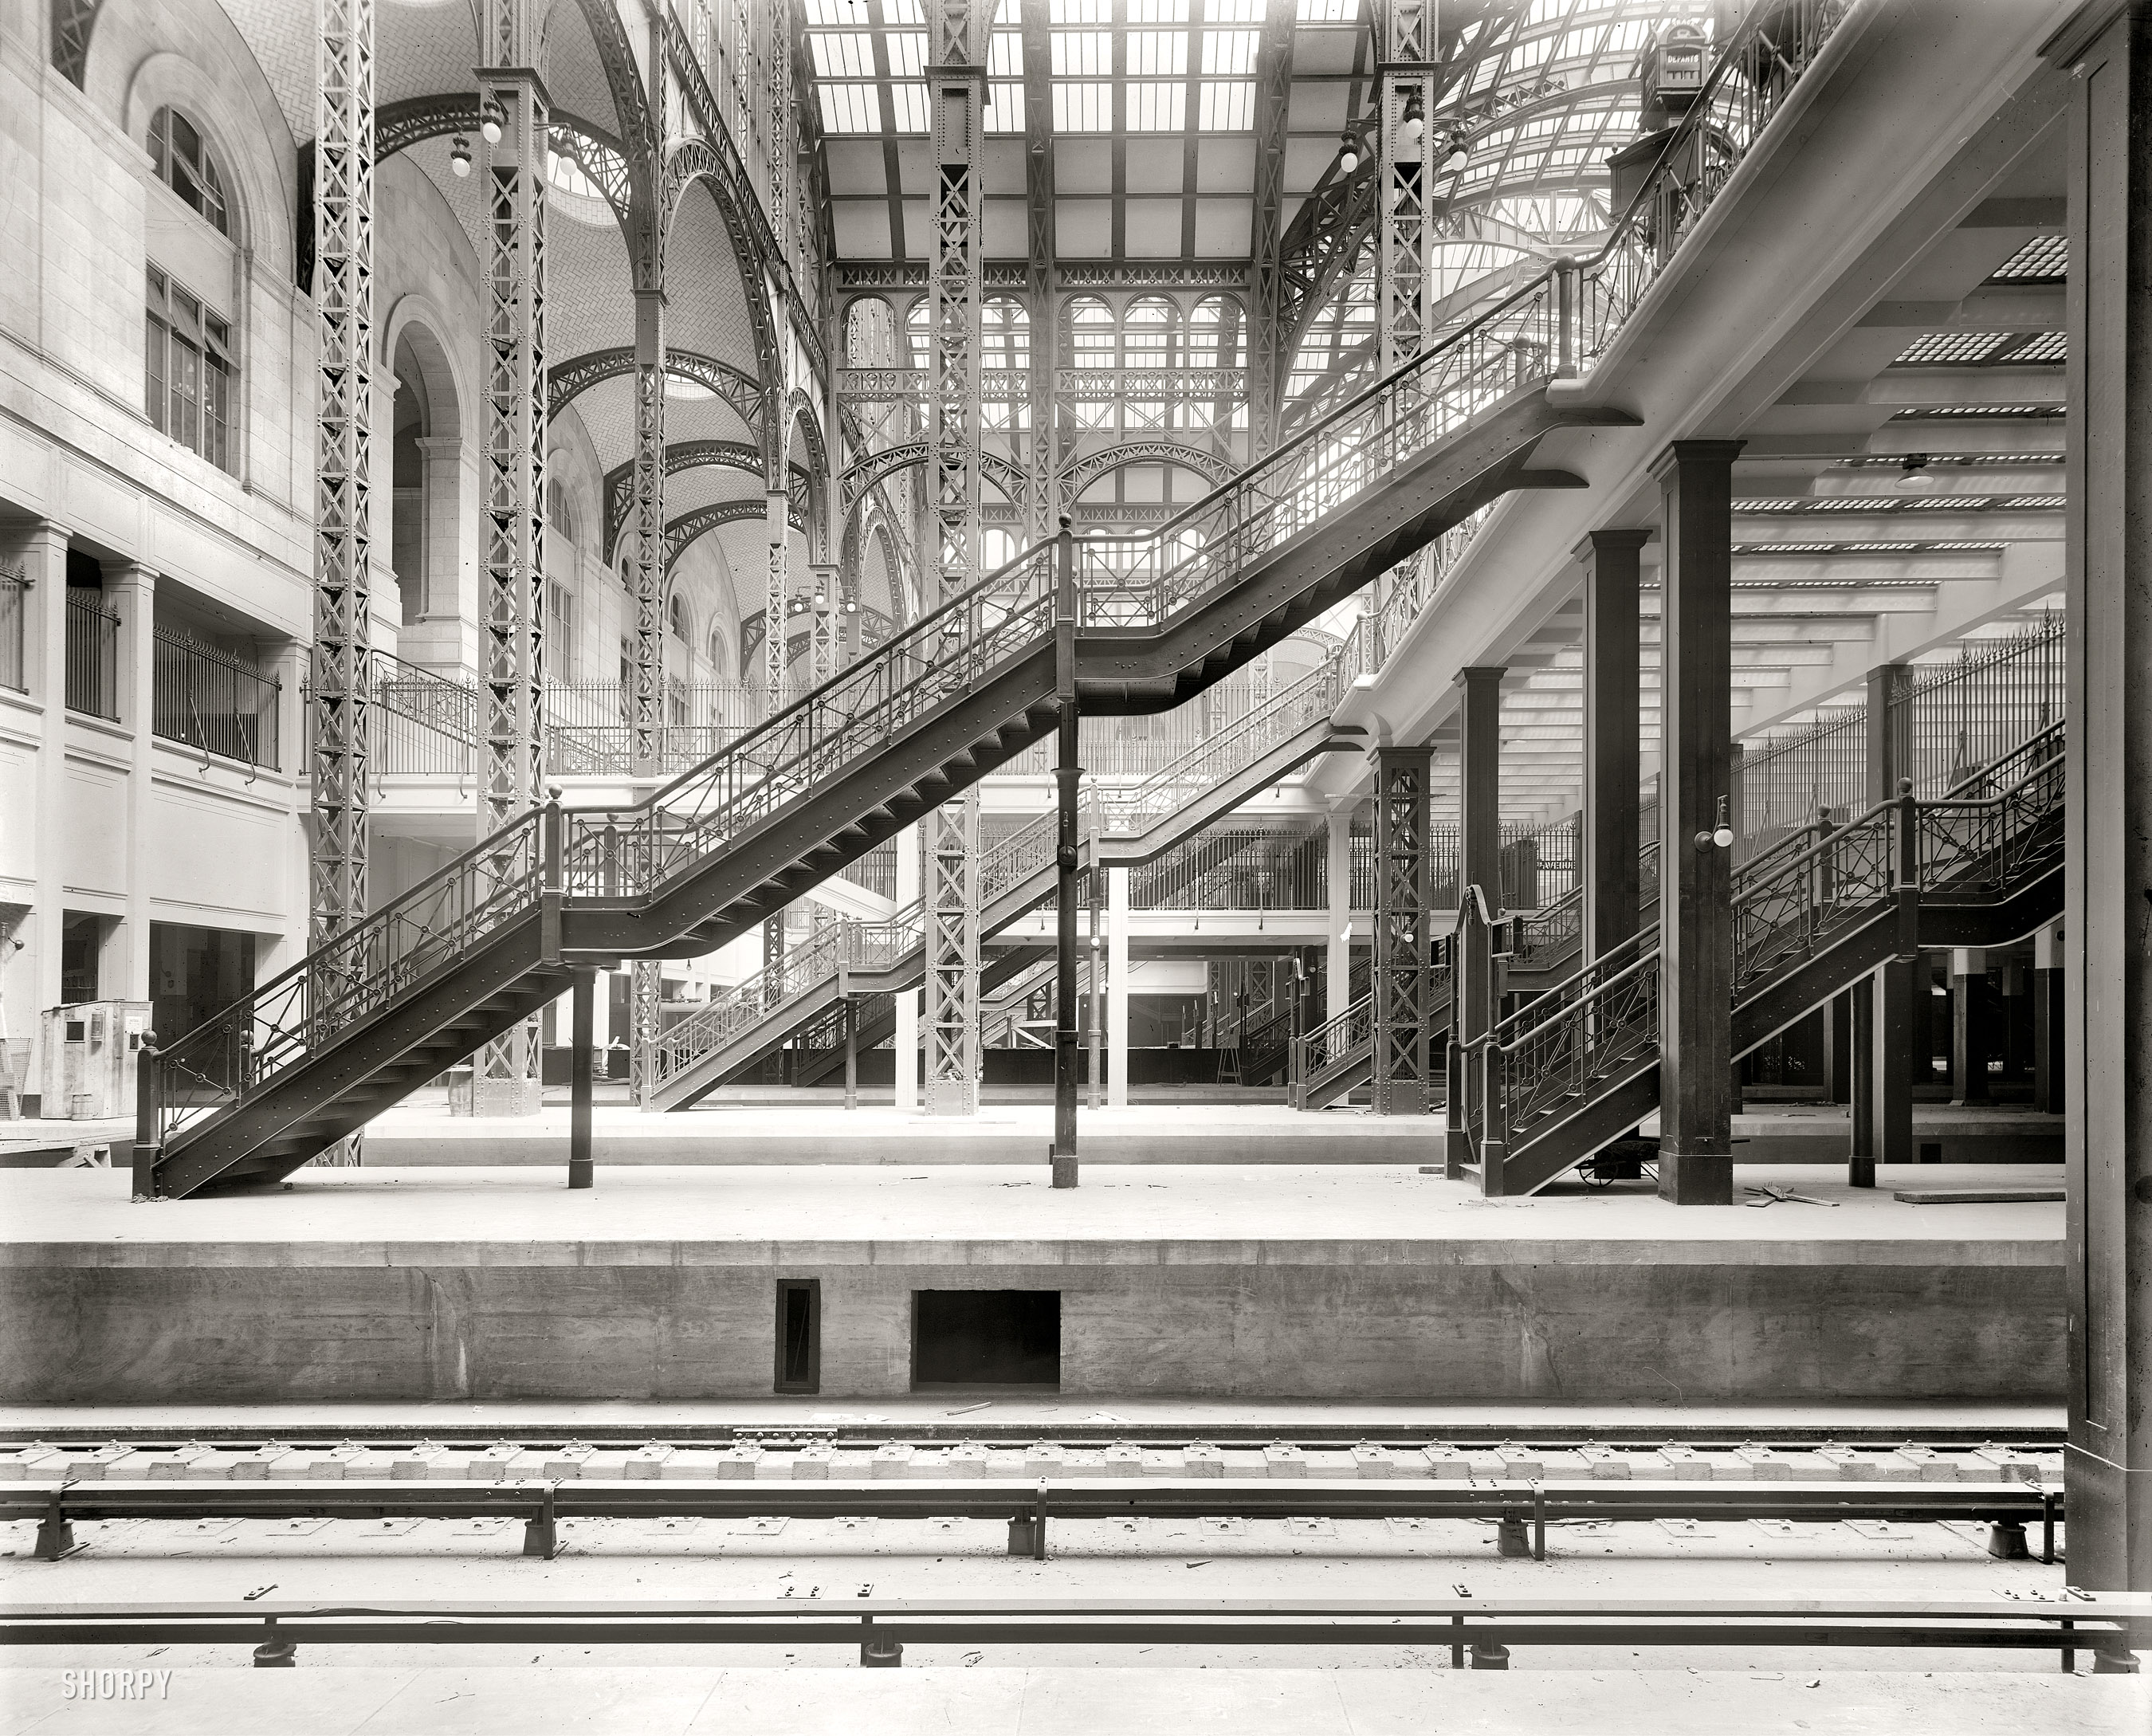 New York ca. 1910. "Pennsylvania Station. Track level, main and exit concourses, stair entrance." 8x10 inch glass negative, Detroit Publishing Co. View full size.